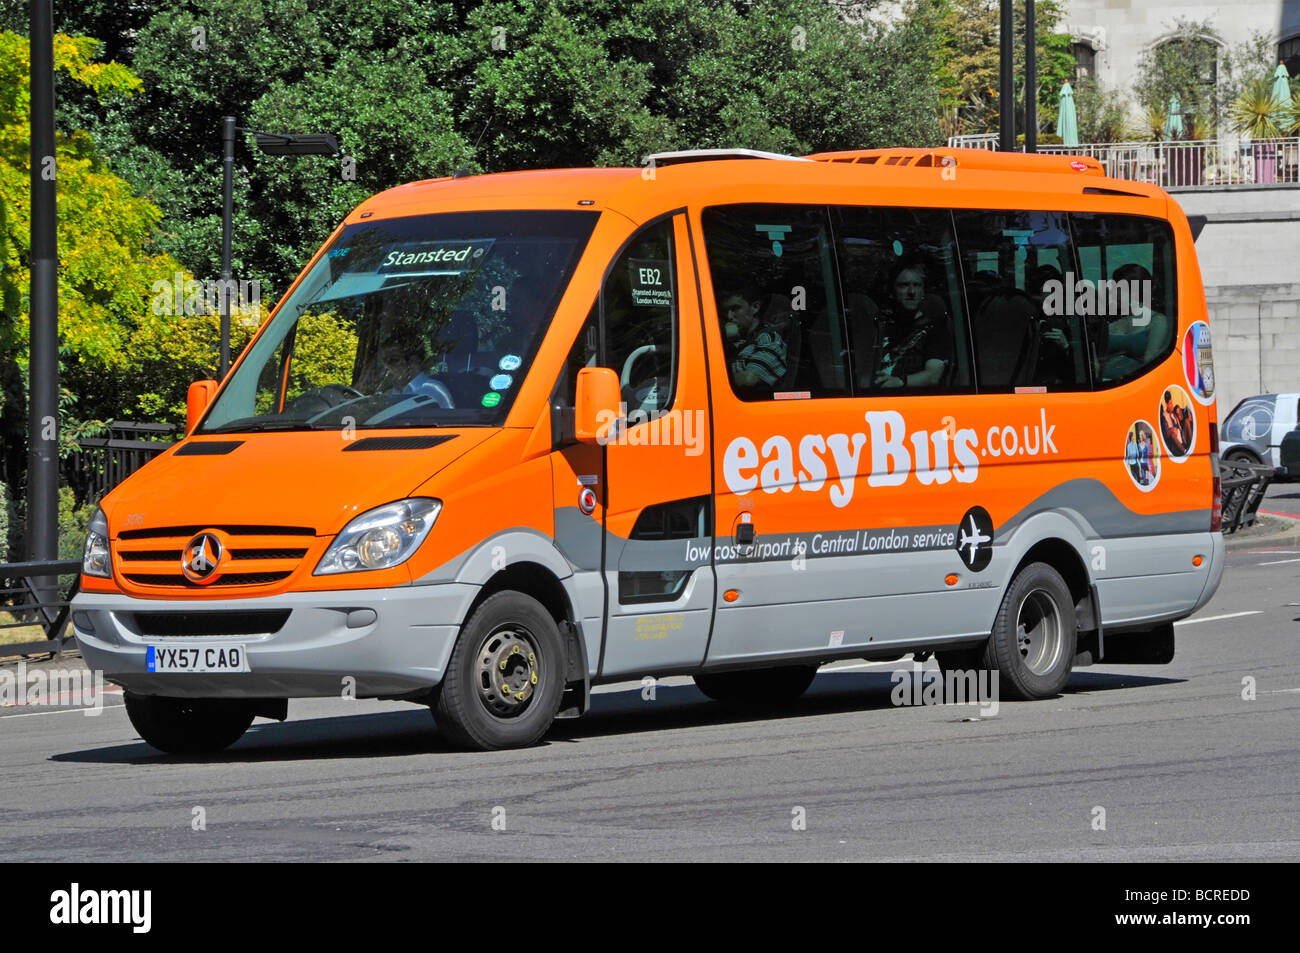 EastBus low cost mini bus service between Central London and Stansted Airport operated by Arriva Stock Photo